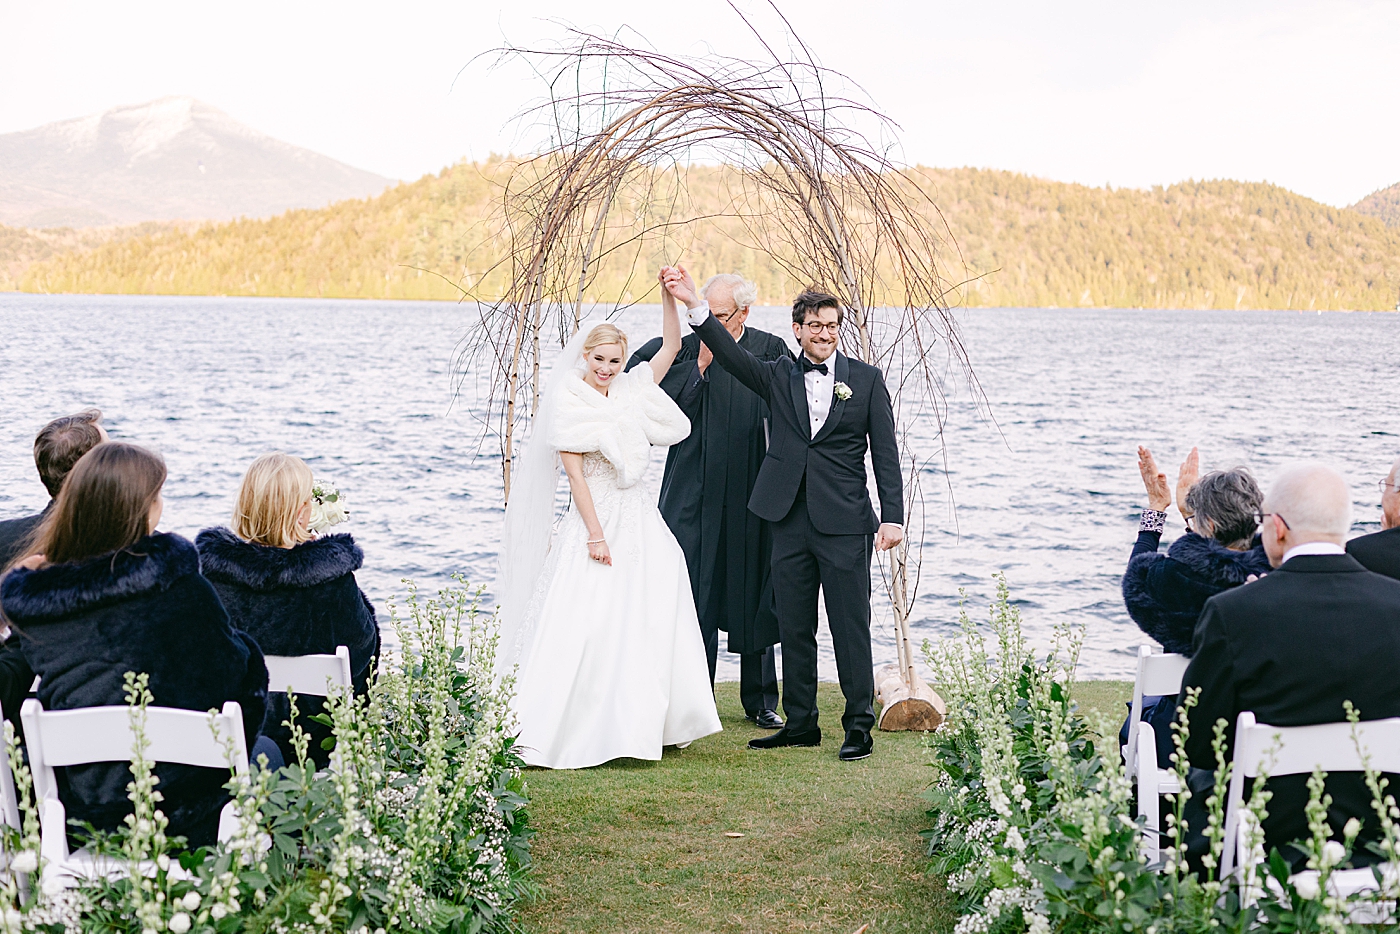 Outdoor wedding ceremony near Lake Placid | Image by Hope Helmuth Photography